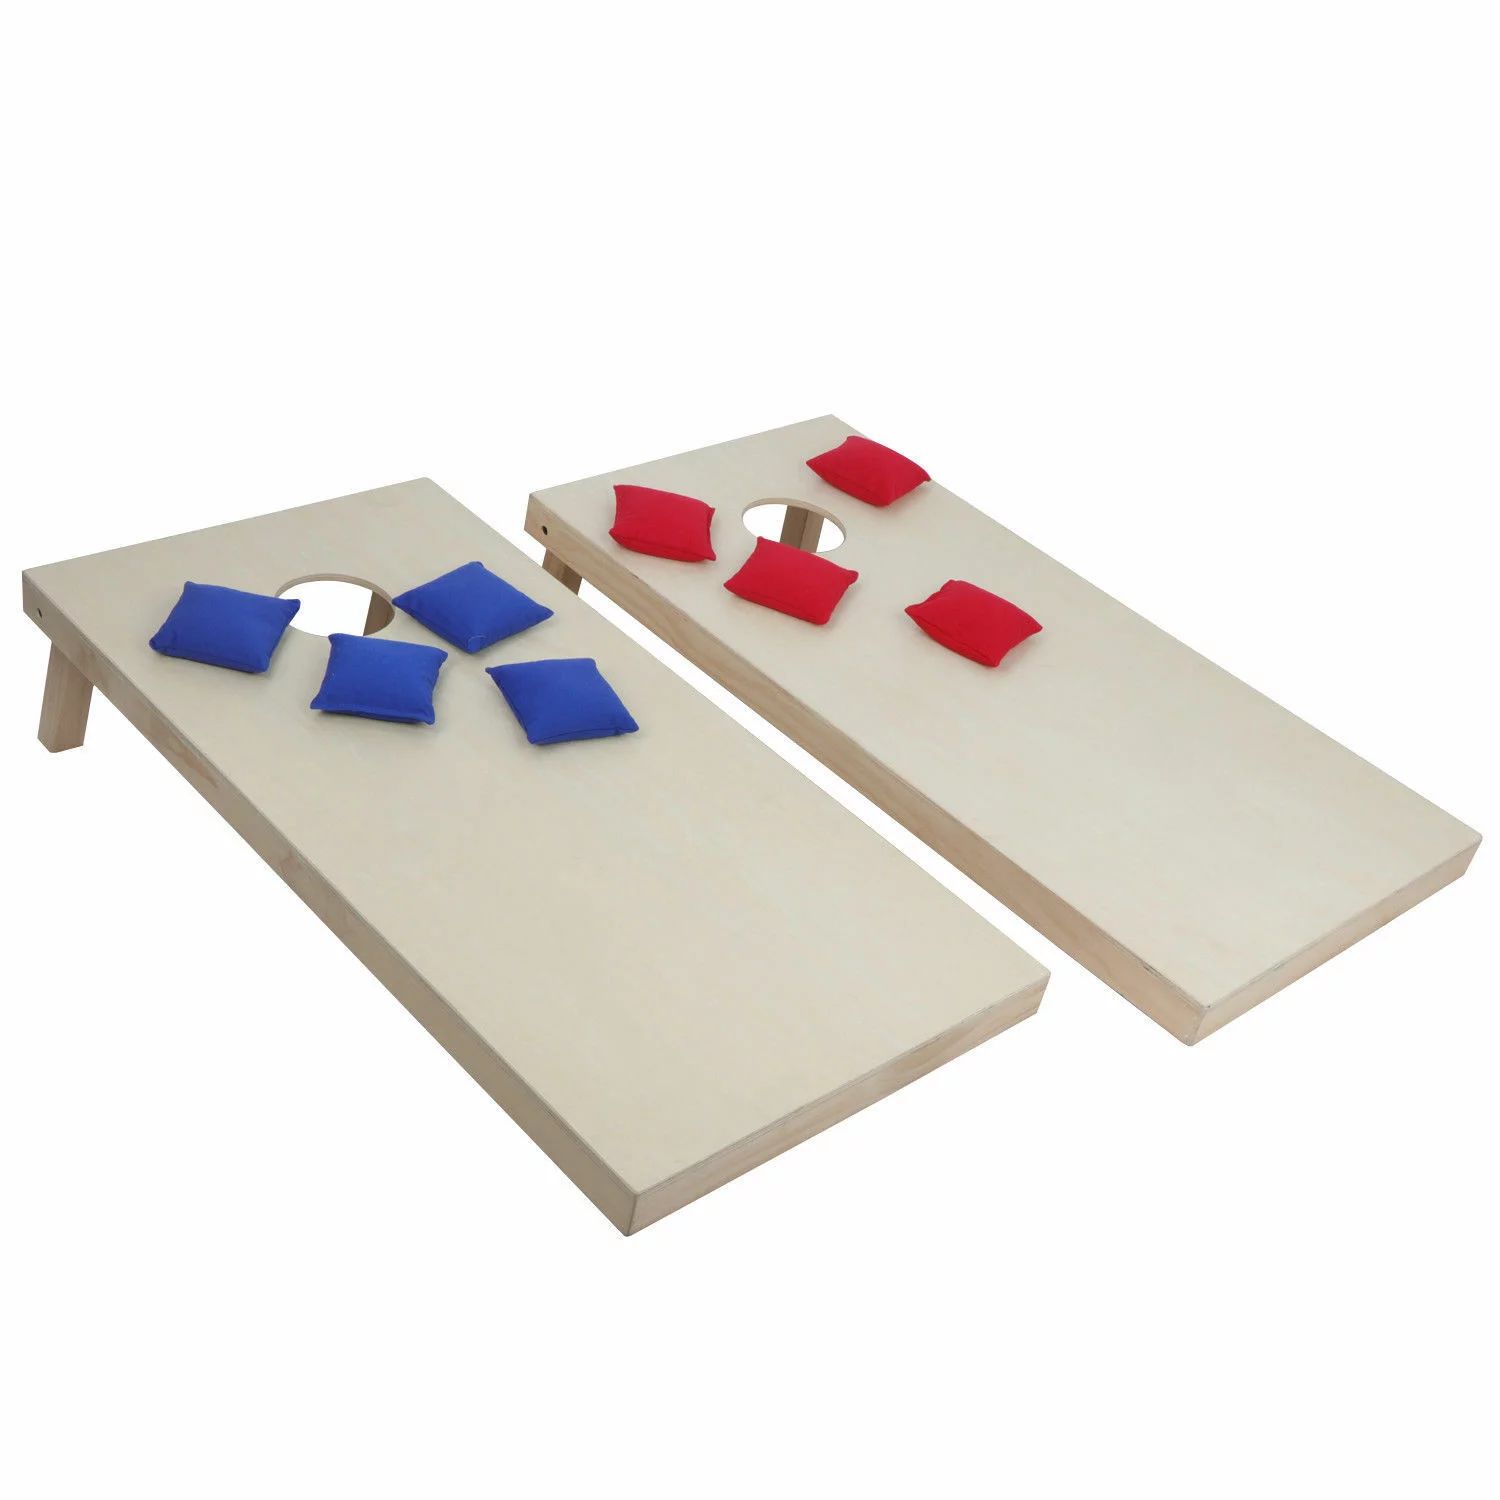 ZENSTYLE 4FT x 2FT Wood Cornhole Bean Bag Toss Game Set with Carry Case | Walmart (US)